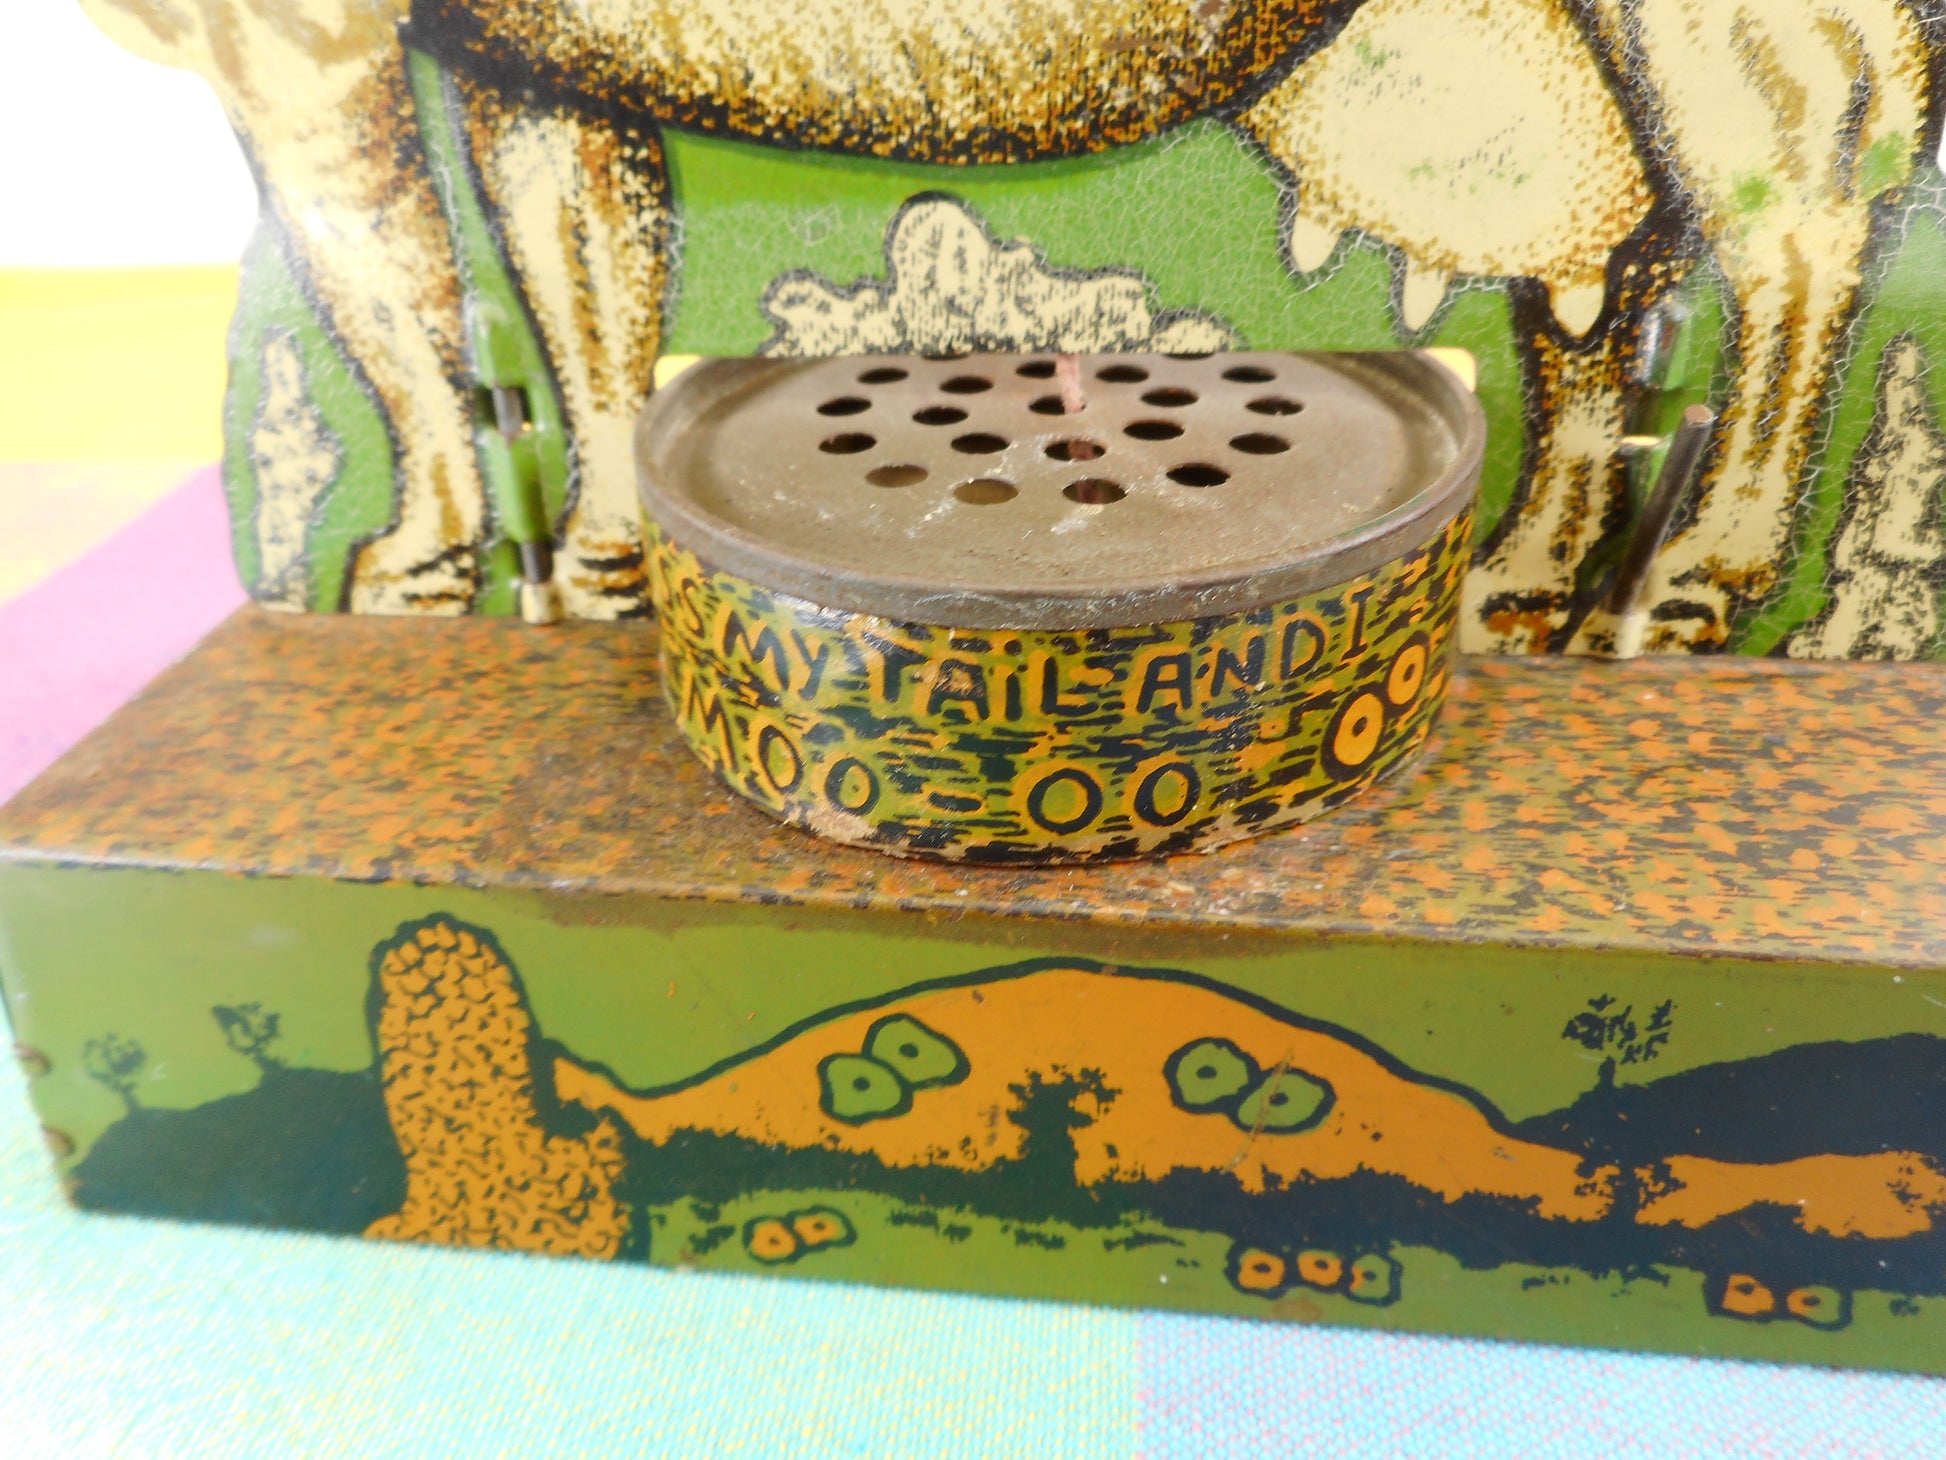 Cow Vintage Litho Tin Toy - Press My Tail And I Moo-oo Noise